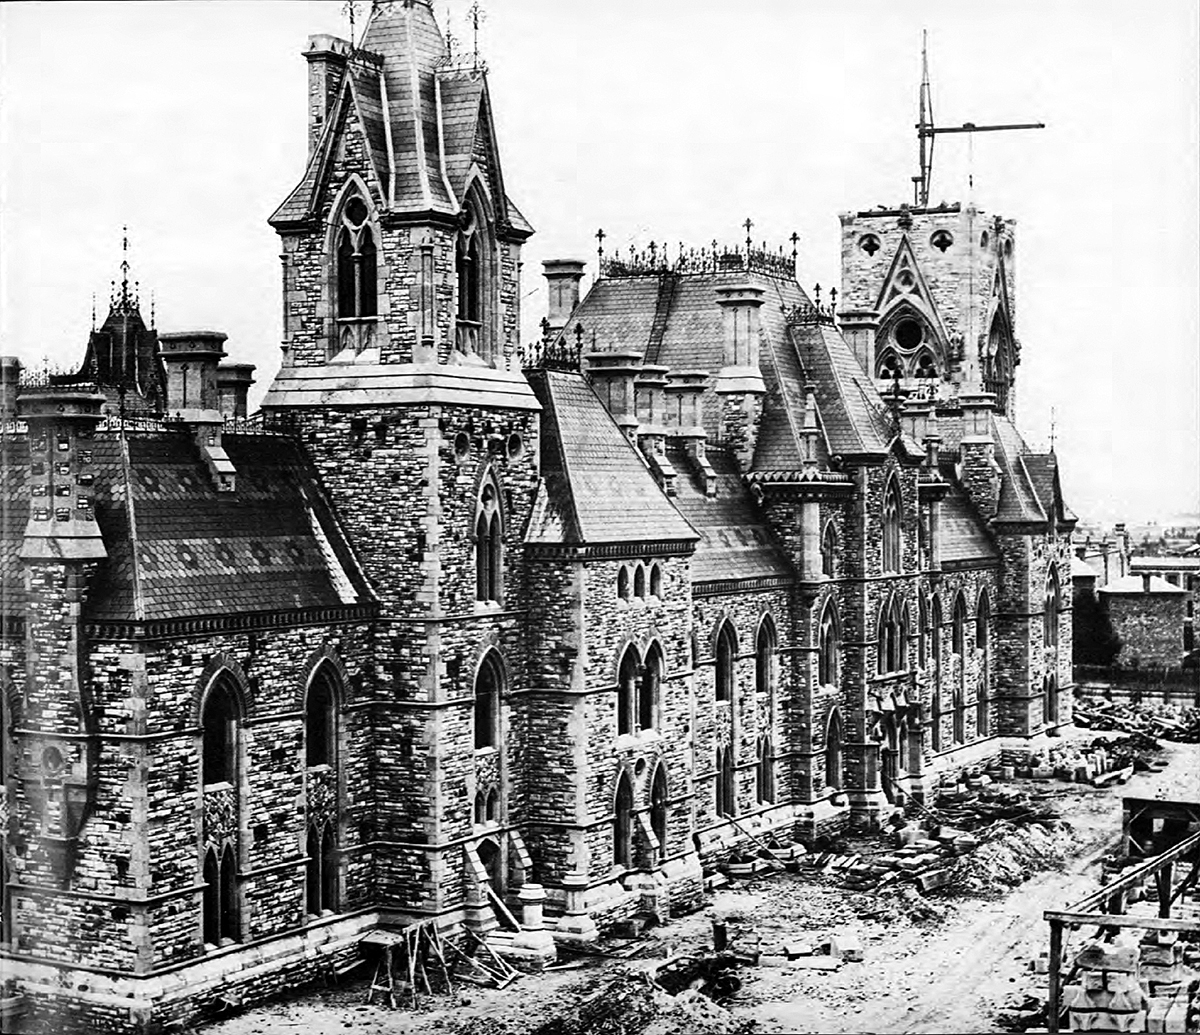 East Block under construction in 1863. (Photo credit: McCord Museum)